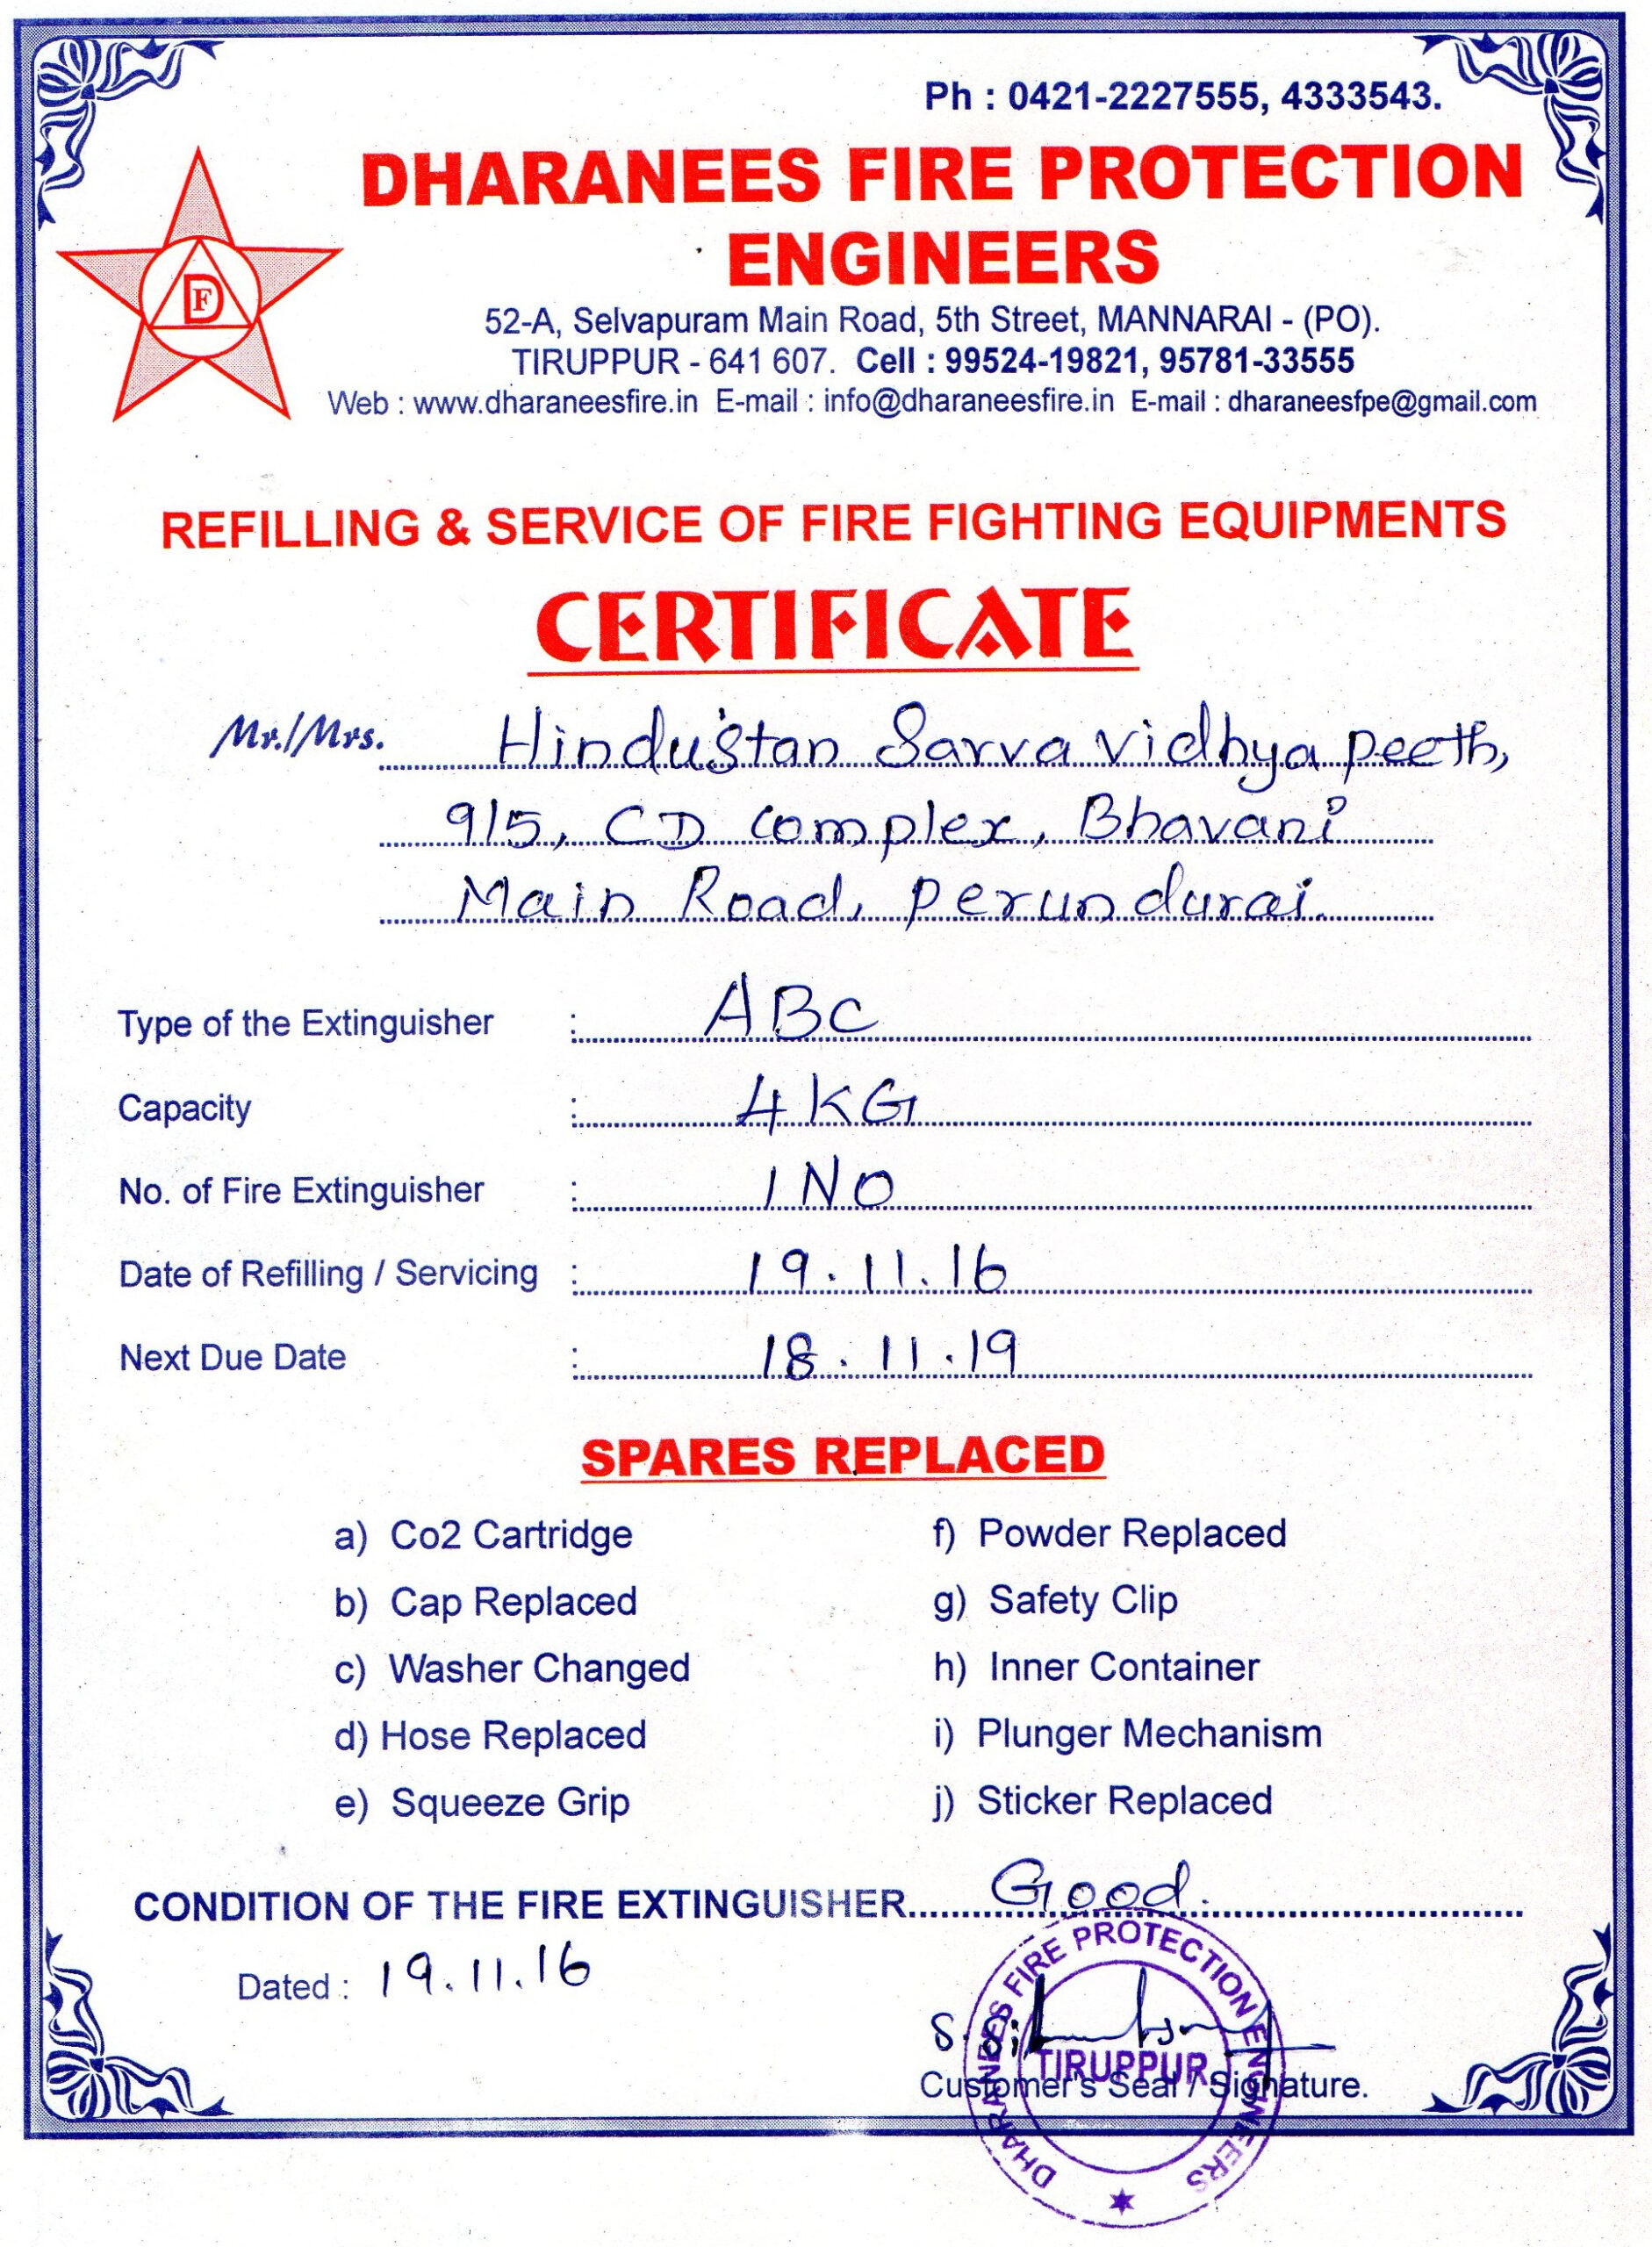 HINDUSTAN SARVA VIDHYAPEETH Intended For Fire Extinguisher Certificate Template